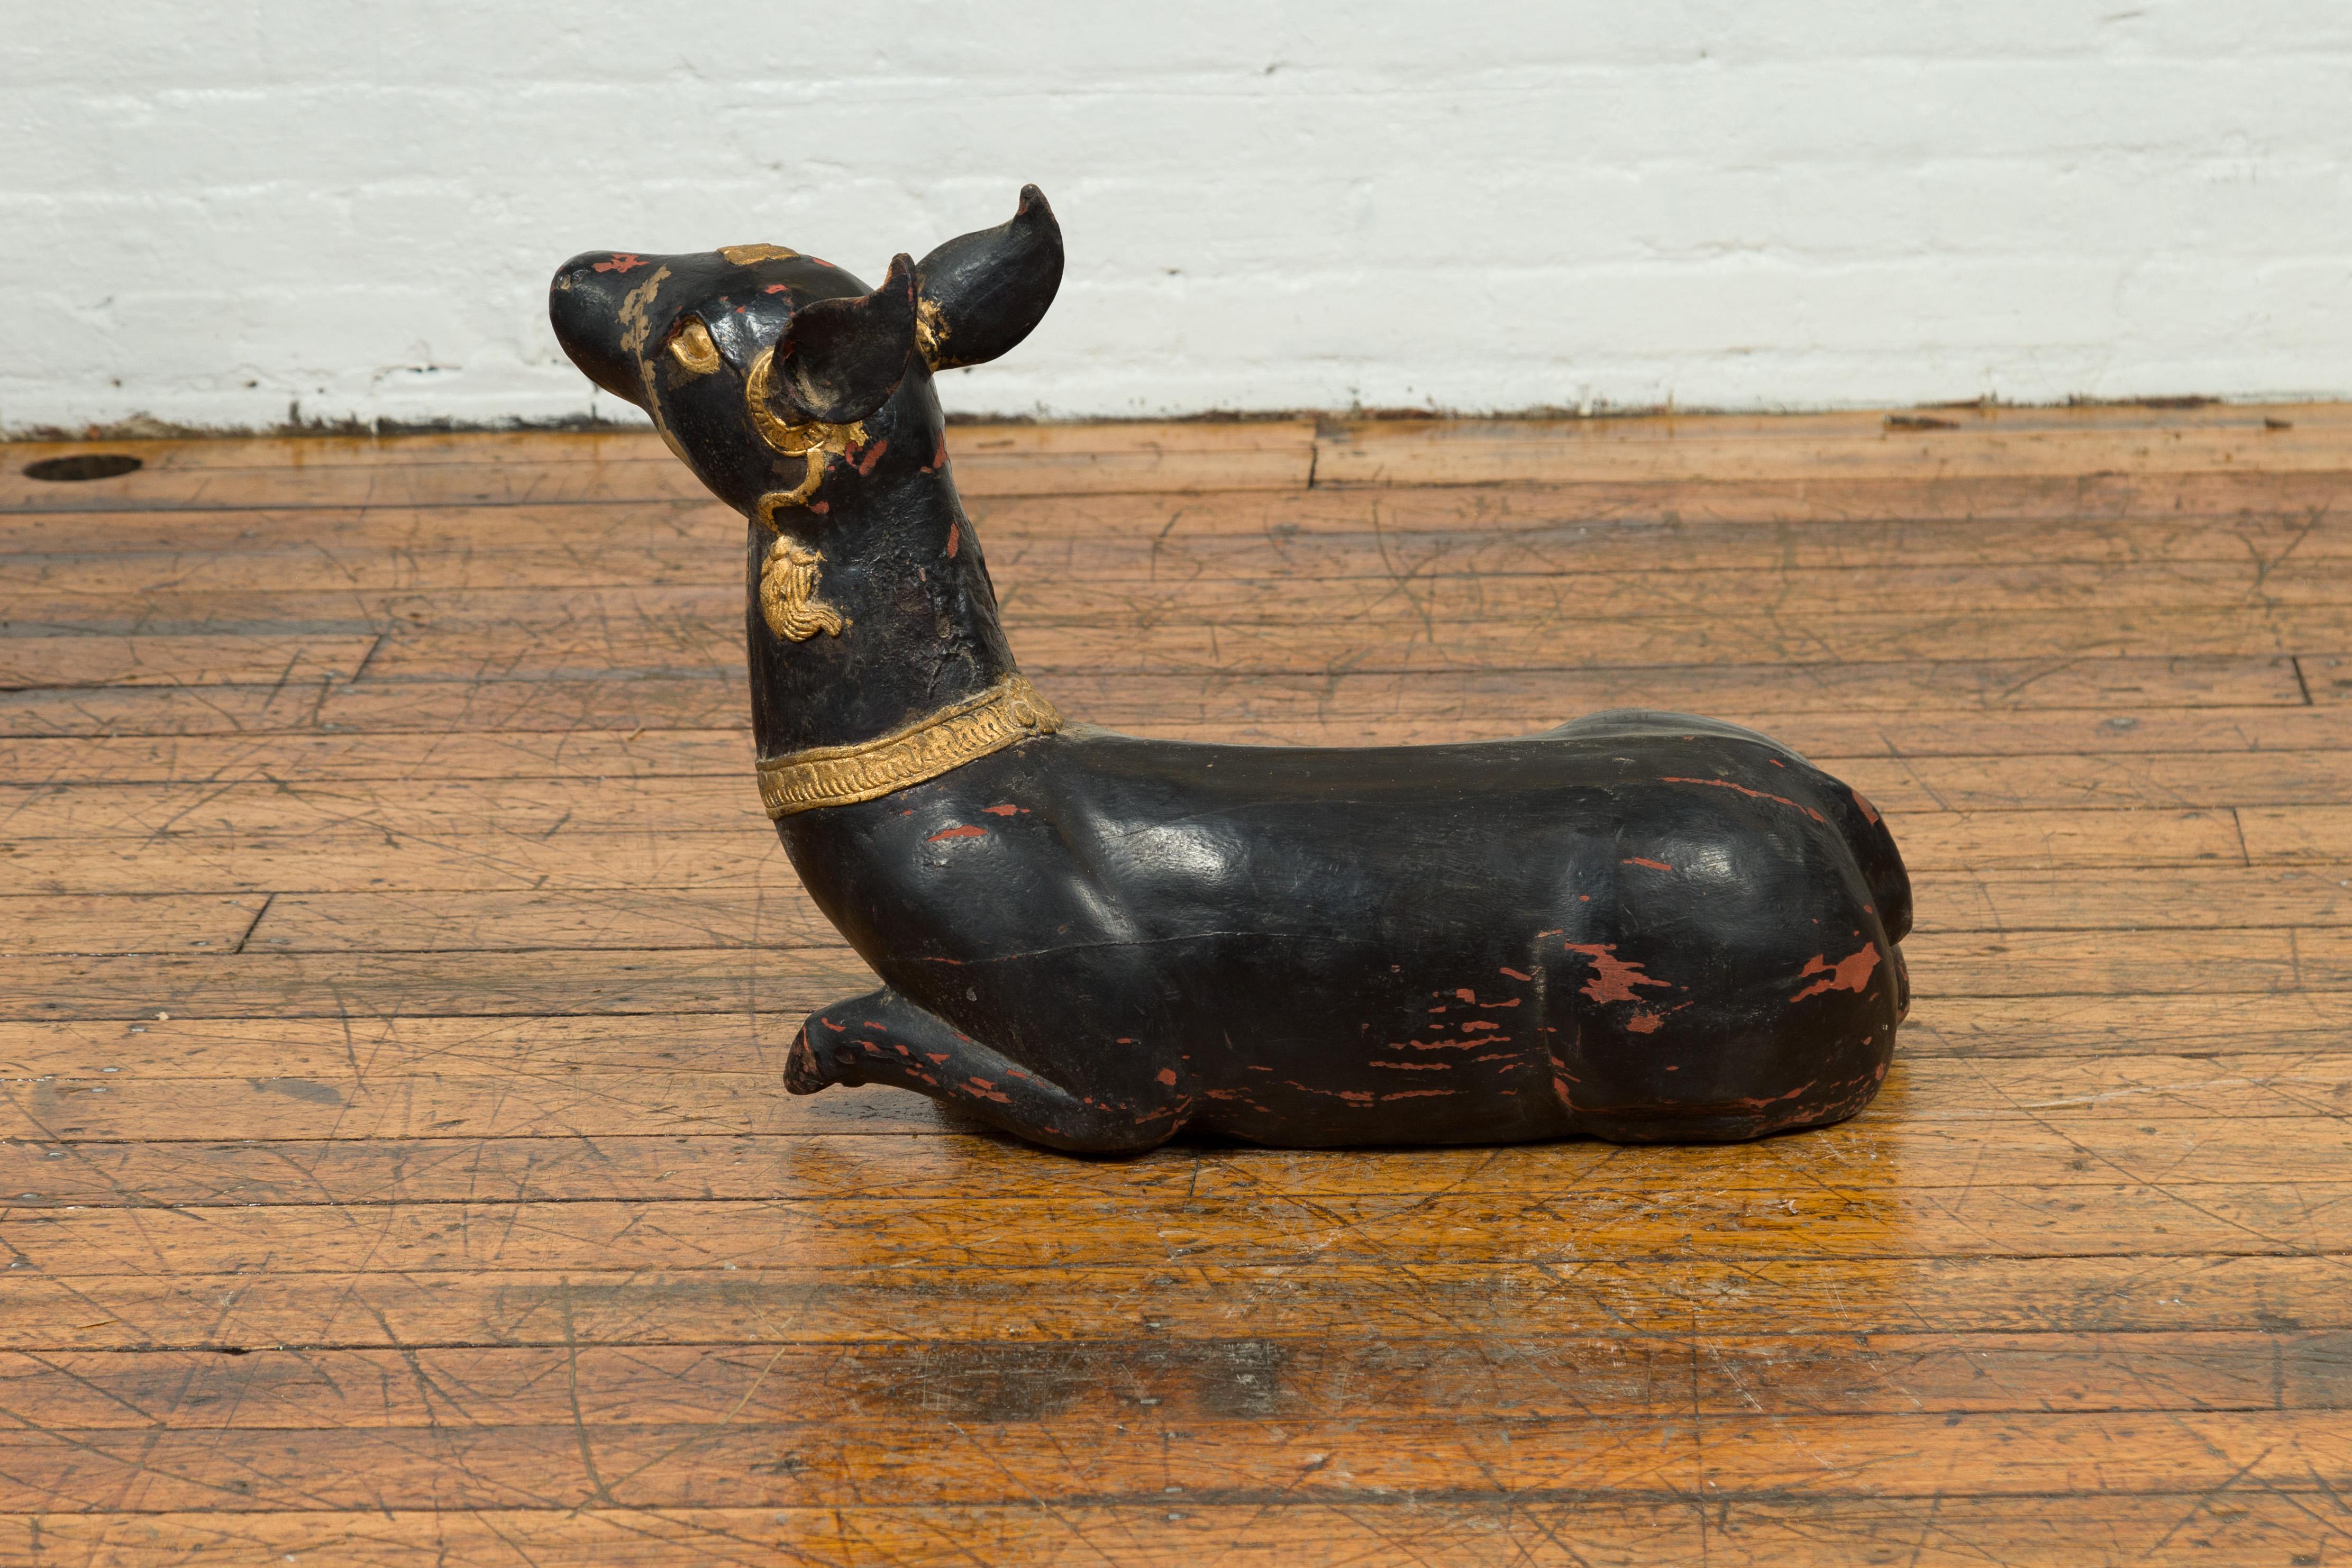 Vintage Thai Black Lacquered Goat Sculpture with Ornate Gilt Jewelry Motifs 2